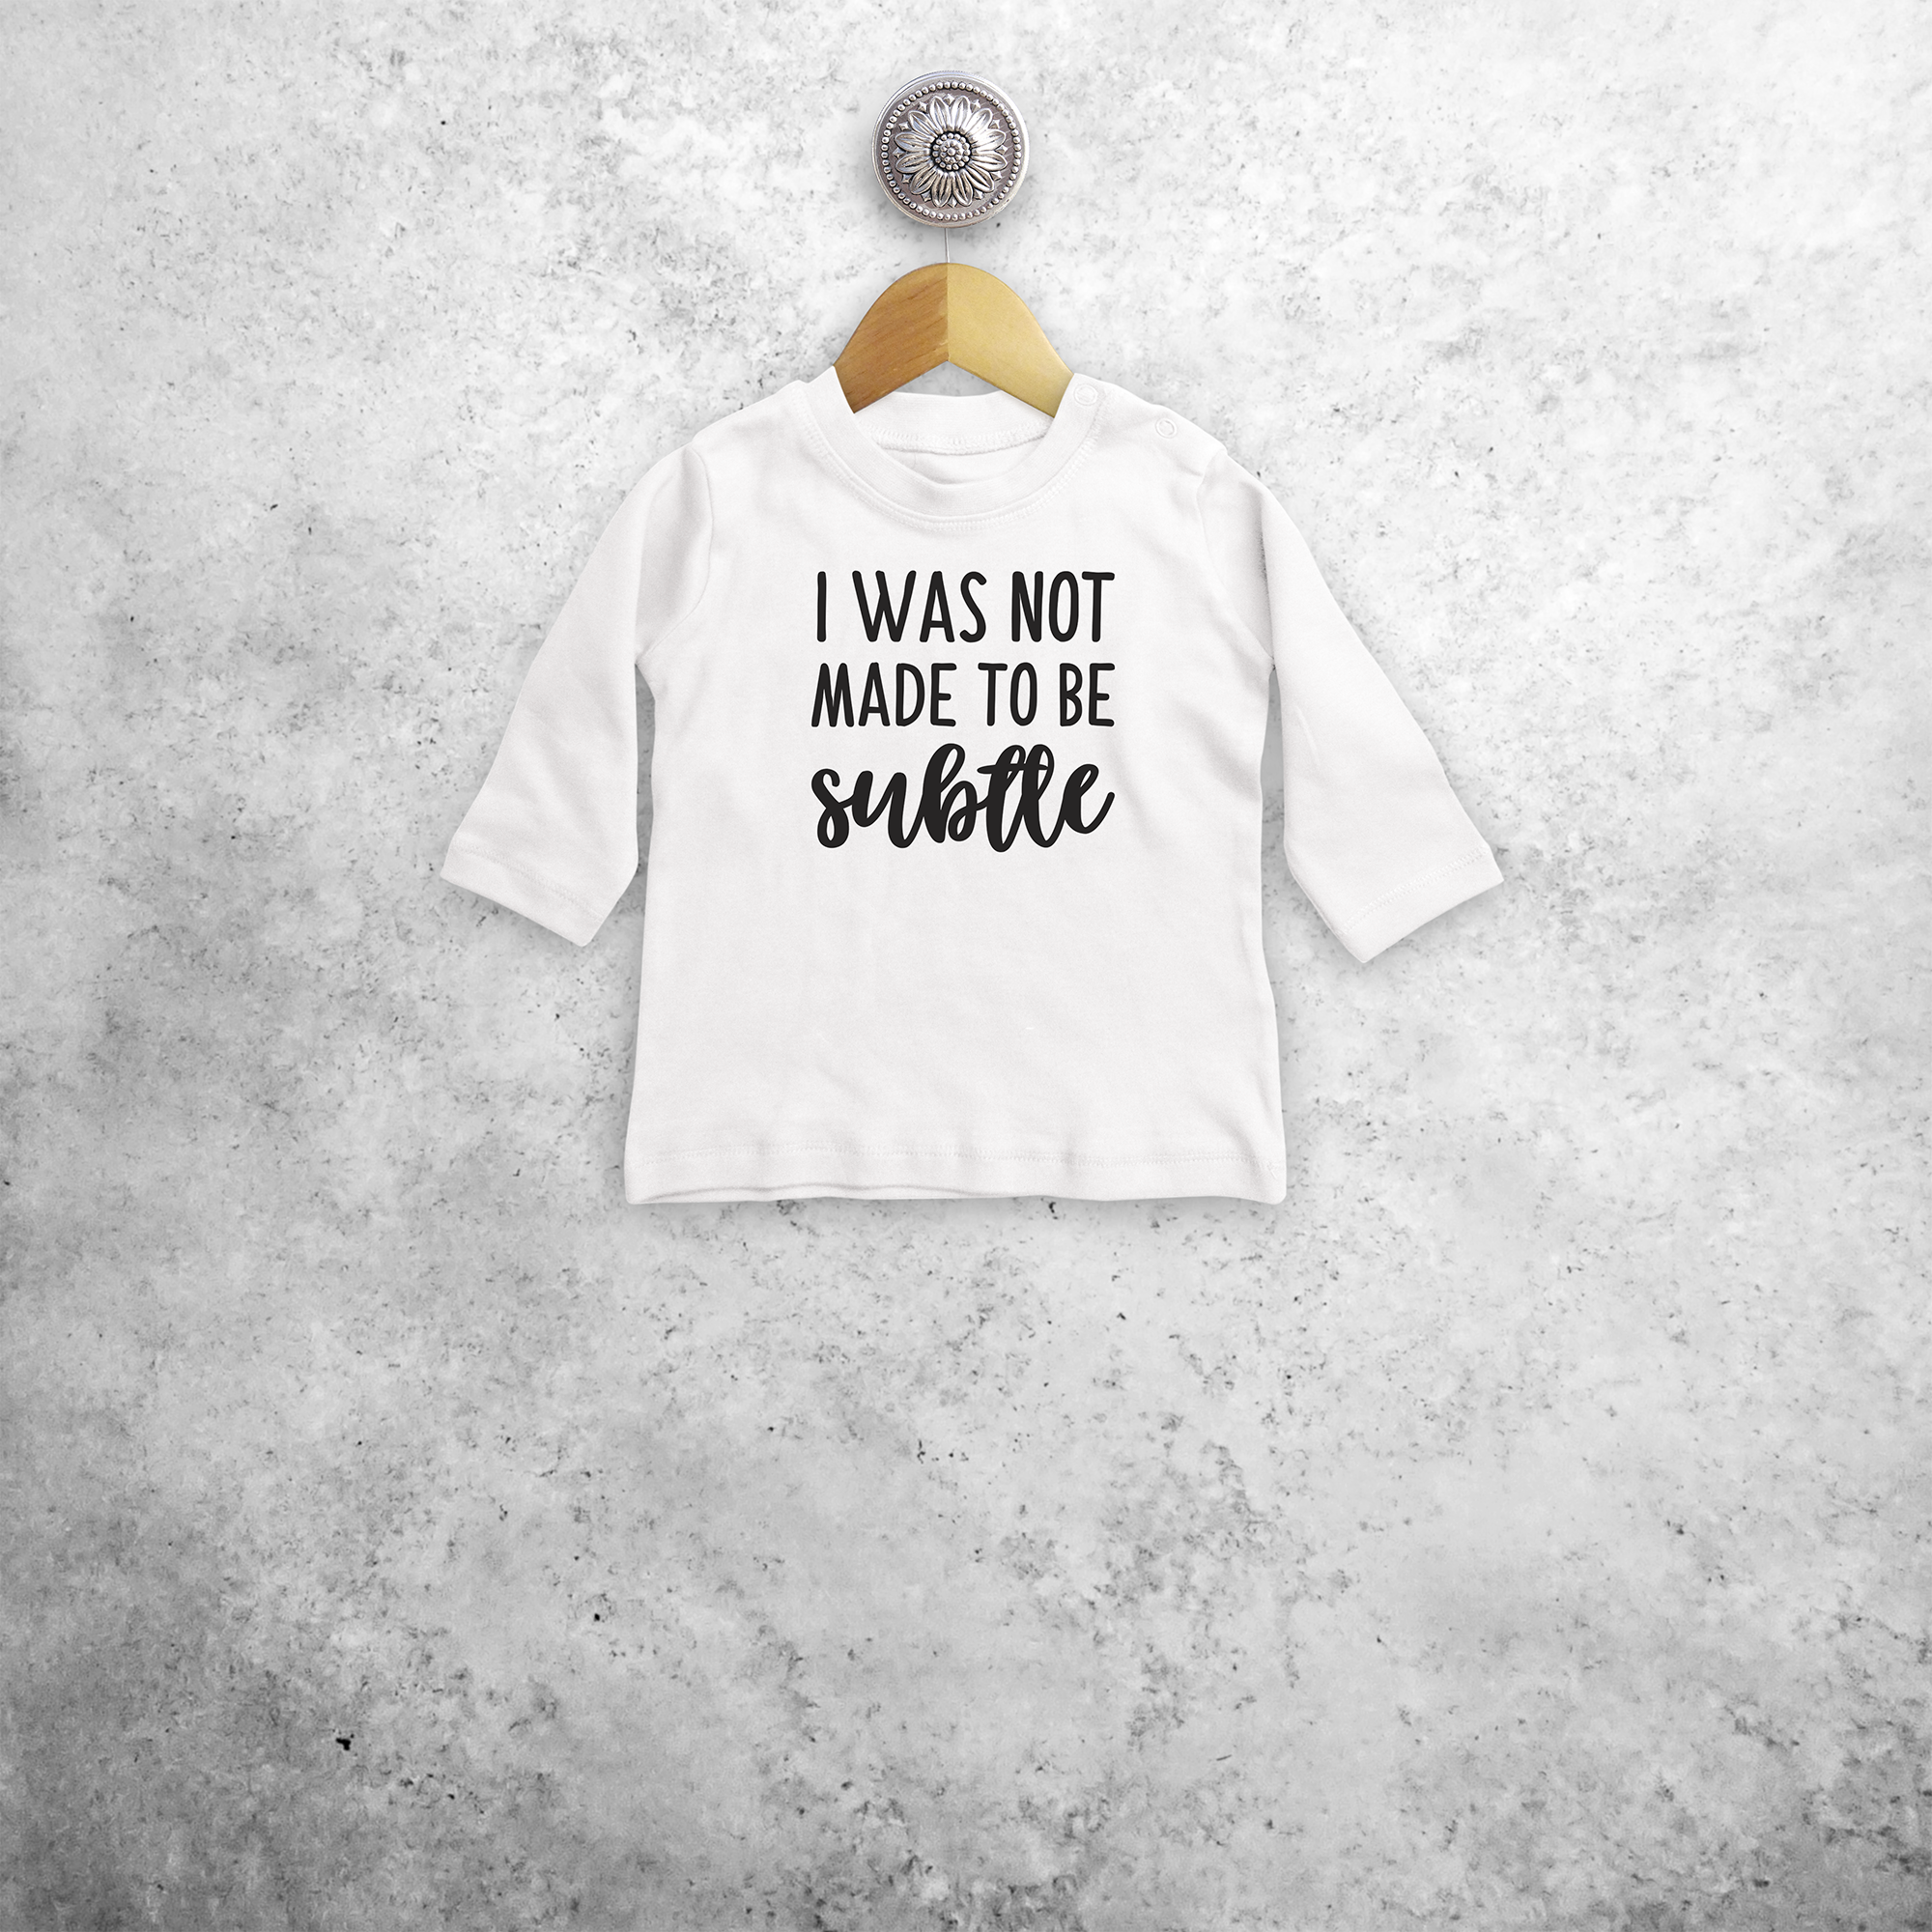 'I was not made to be subtle' baby longsleeve shirt